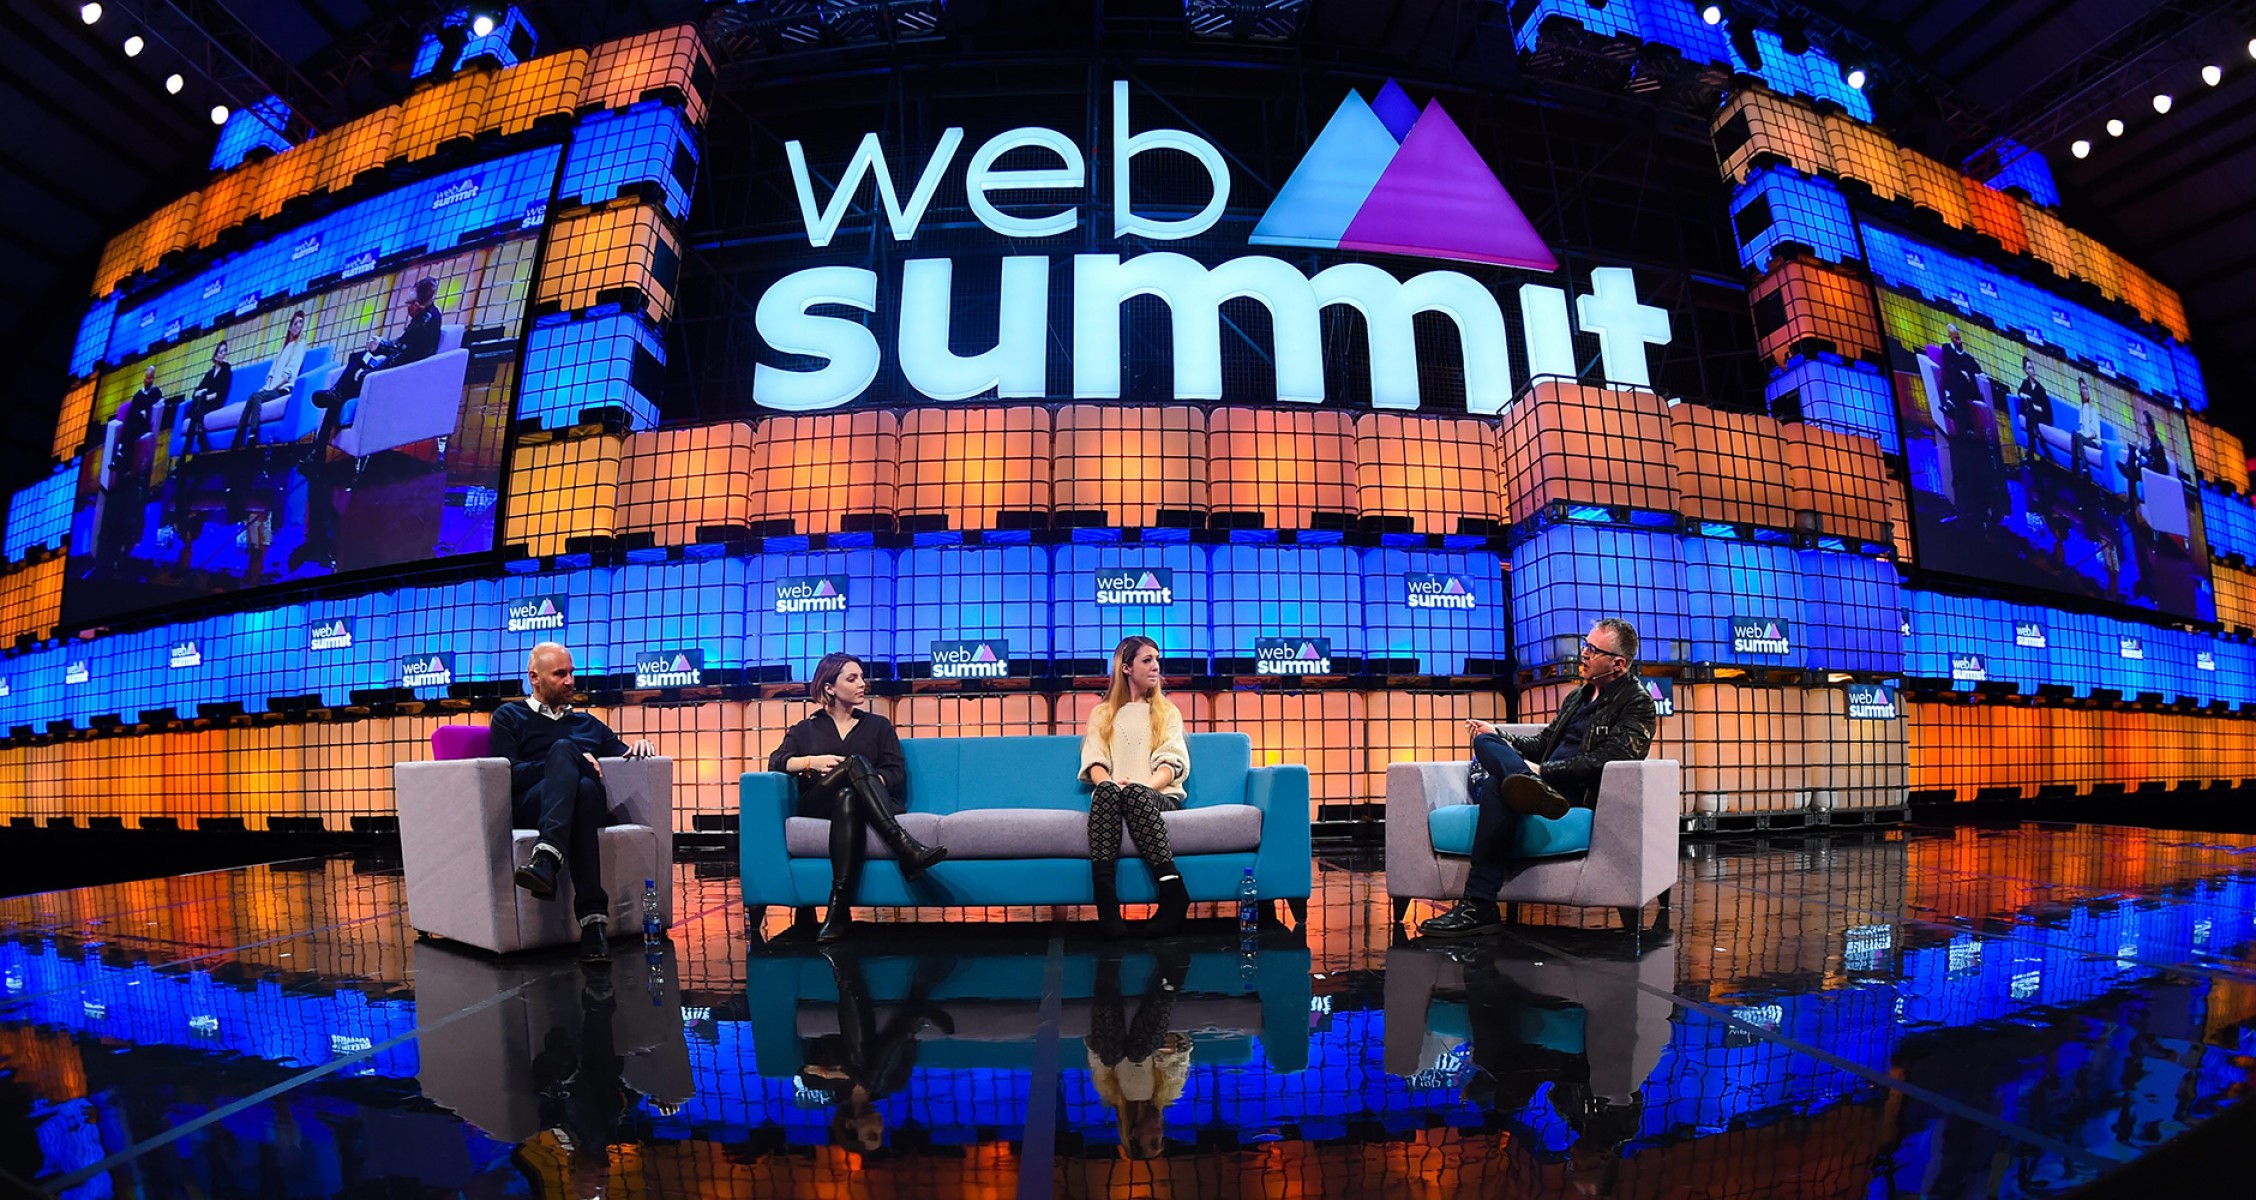 4 Takeaways on AI from the WebSummit 2022